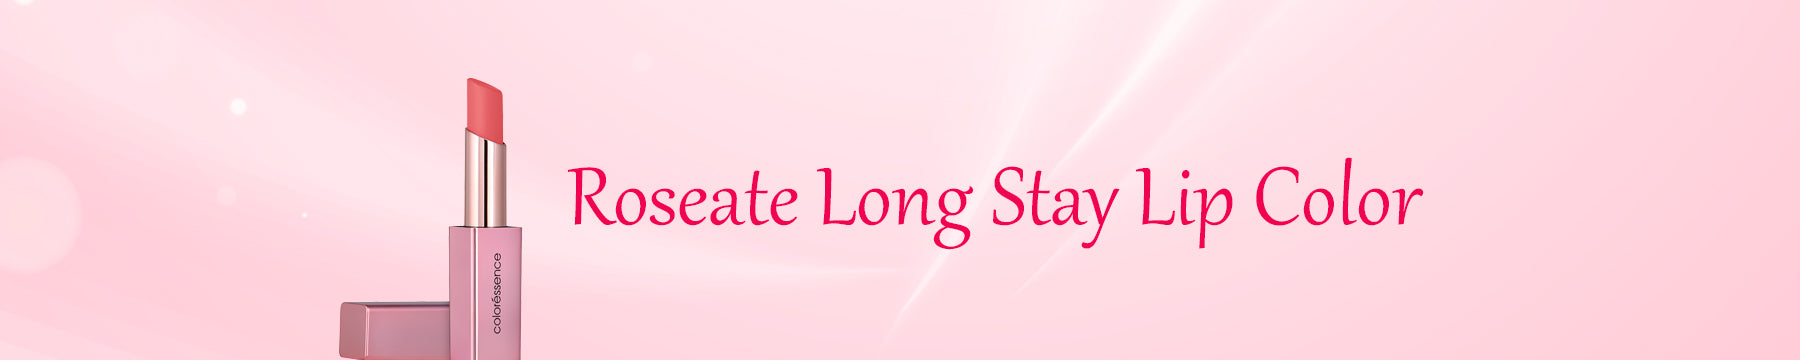 ROSEATE LONG STAY LIP COLOR